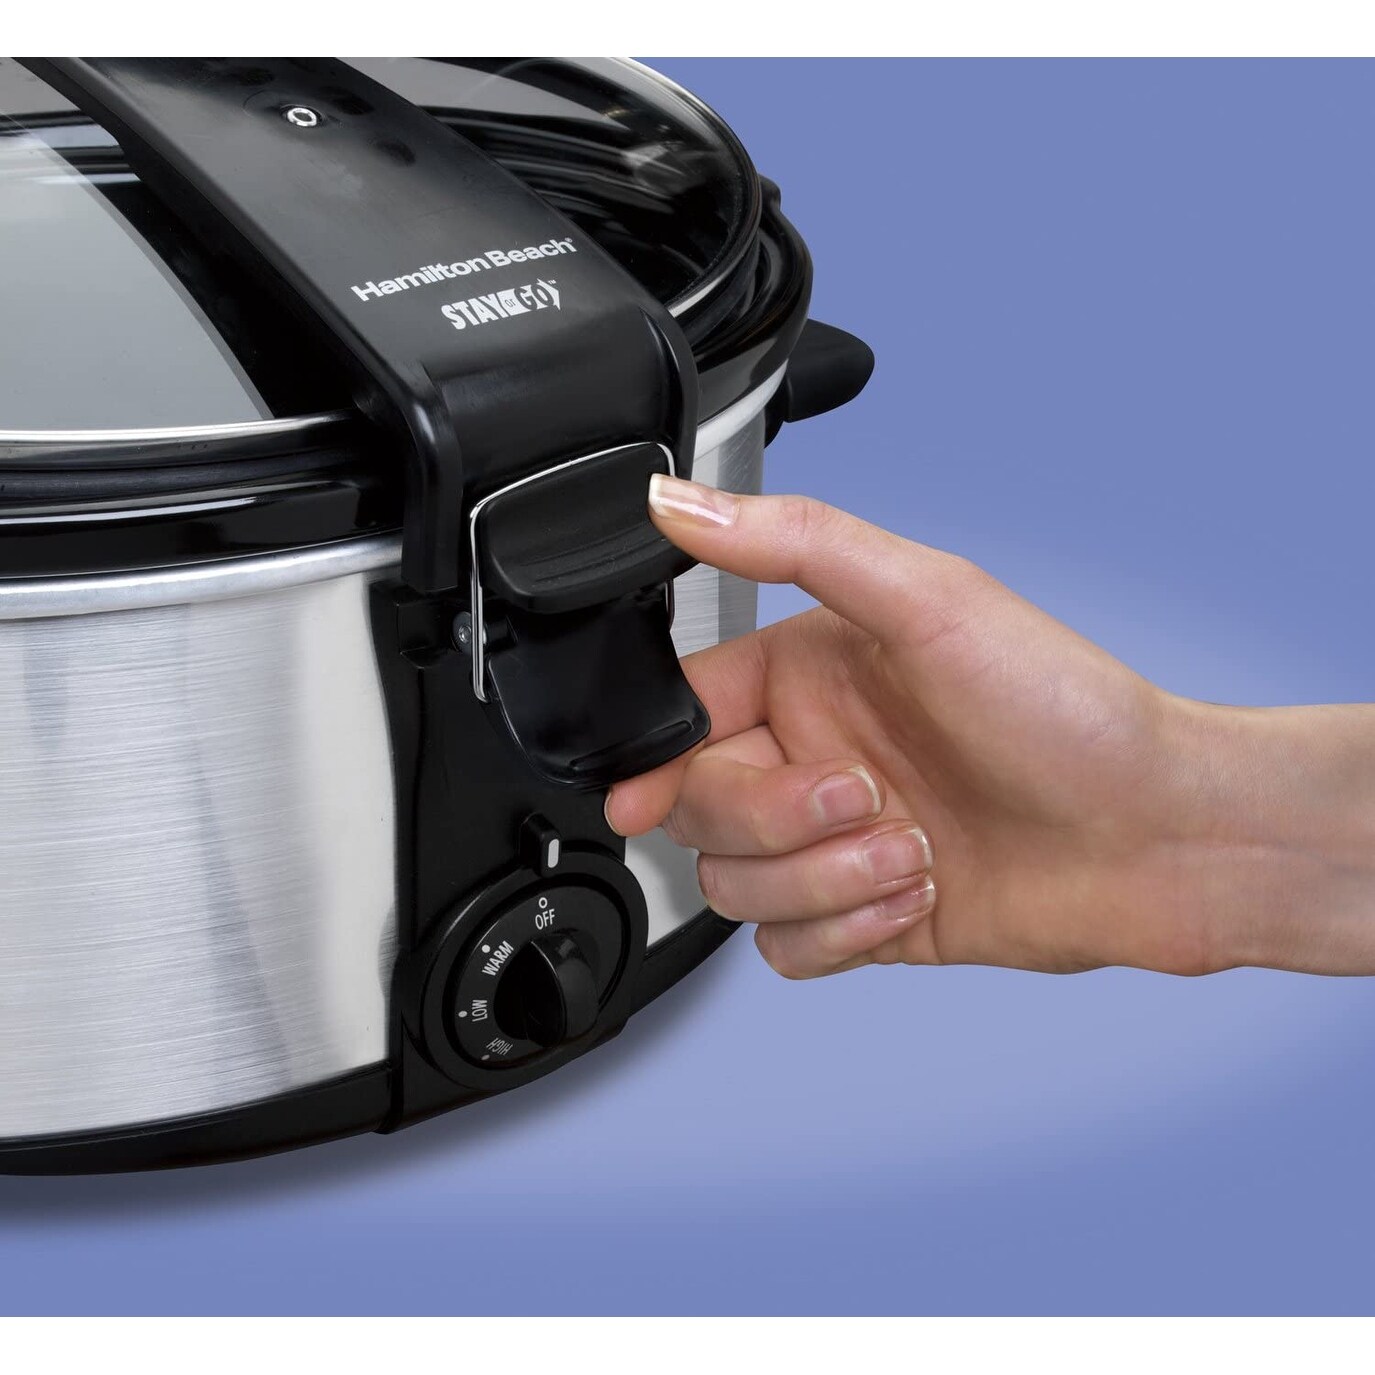 https://ak1.ostkcdn.com/images/products/is/images/direct/731a3feb0f2ebcfbe20cddb54708527b59ea3148/Stay-or-Go-Portable-7-Quart-Slow-Cooker-with-Lid-Lock-for-Easy-Transport%2C-Dishwasher-Safe-Crock.jpg